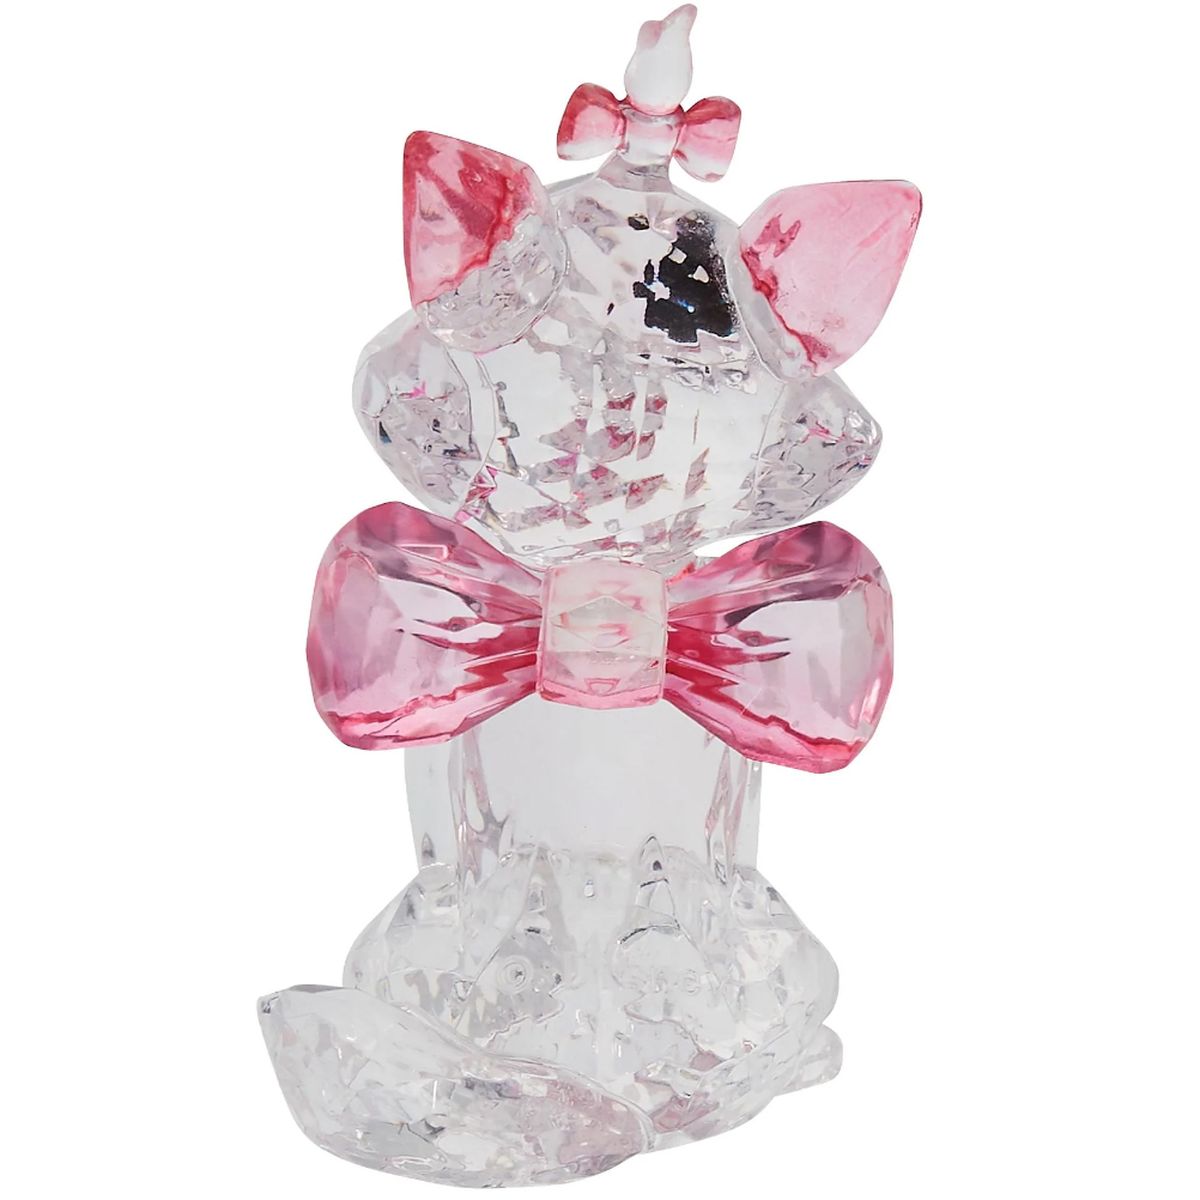 Marie Facets Figurine by Licensed Facets